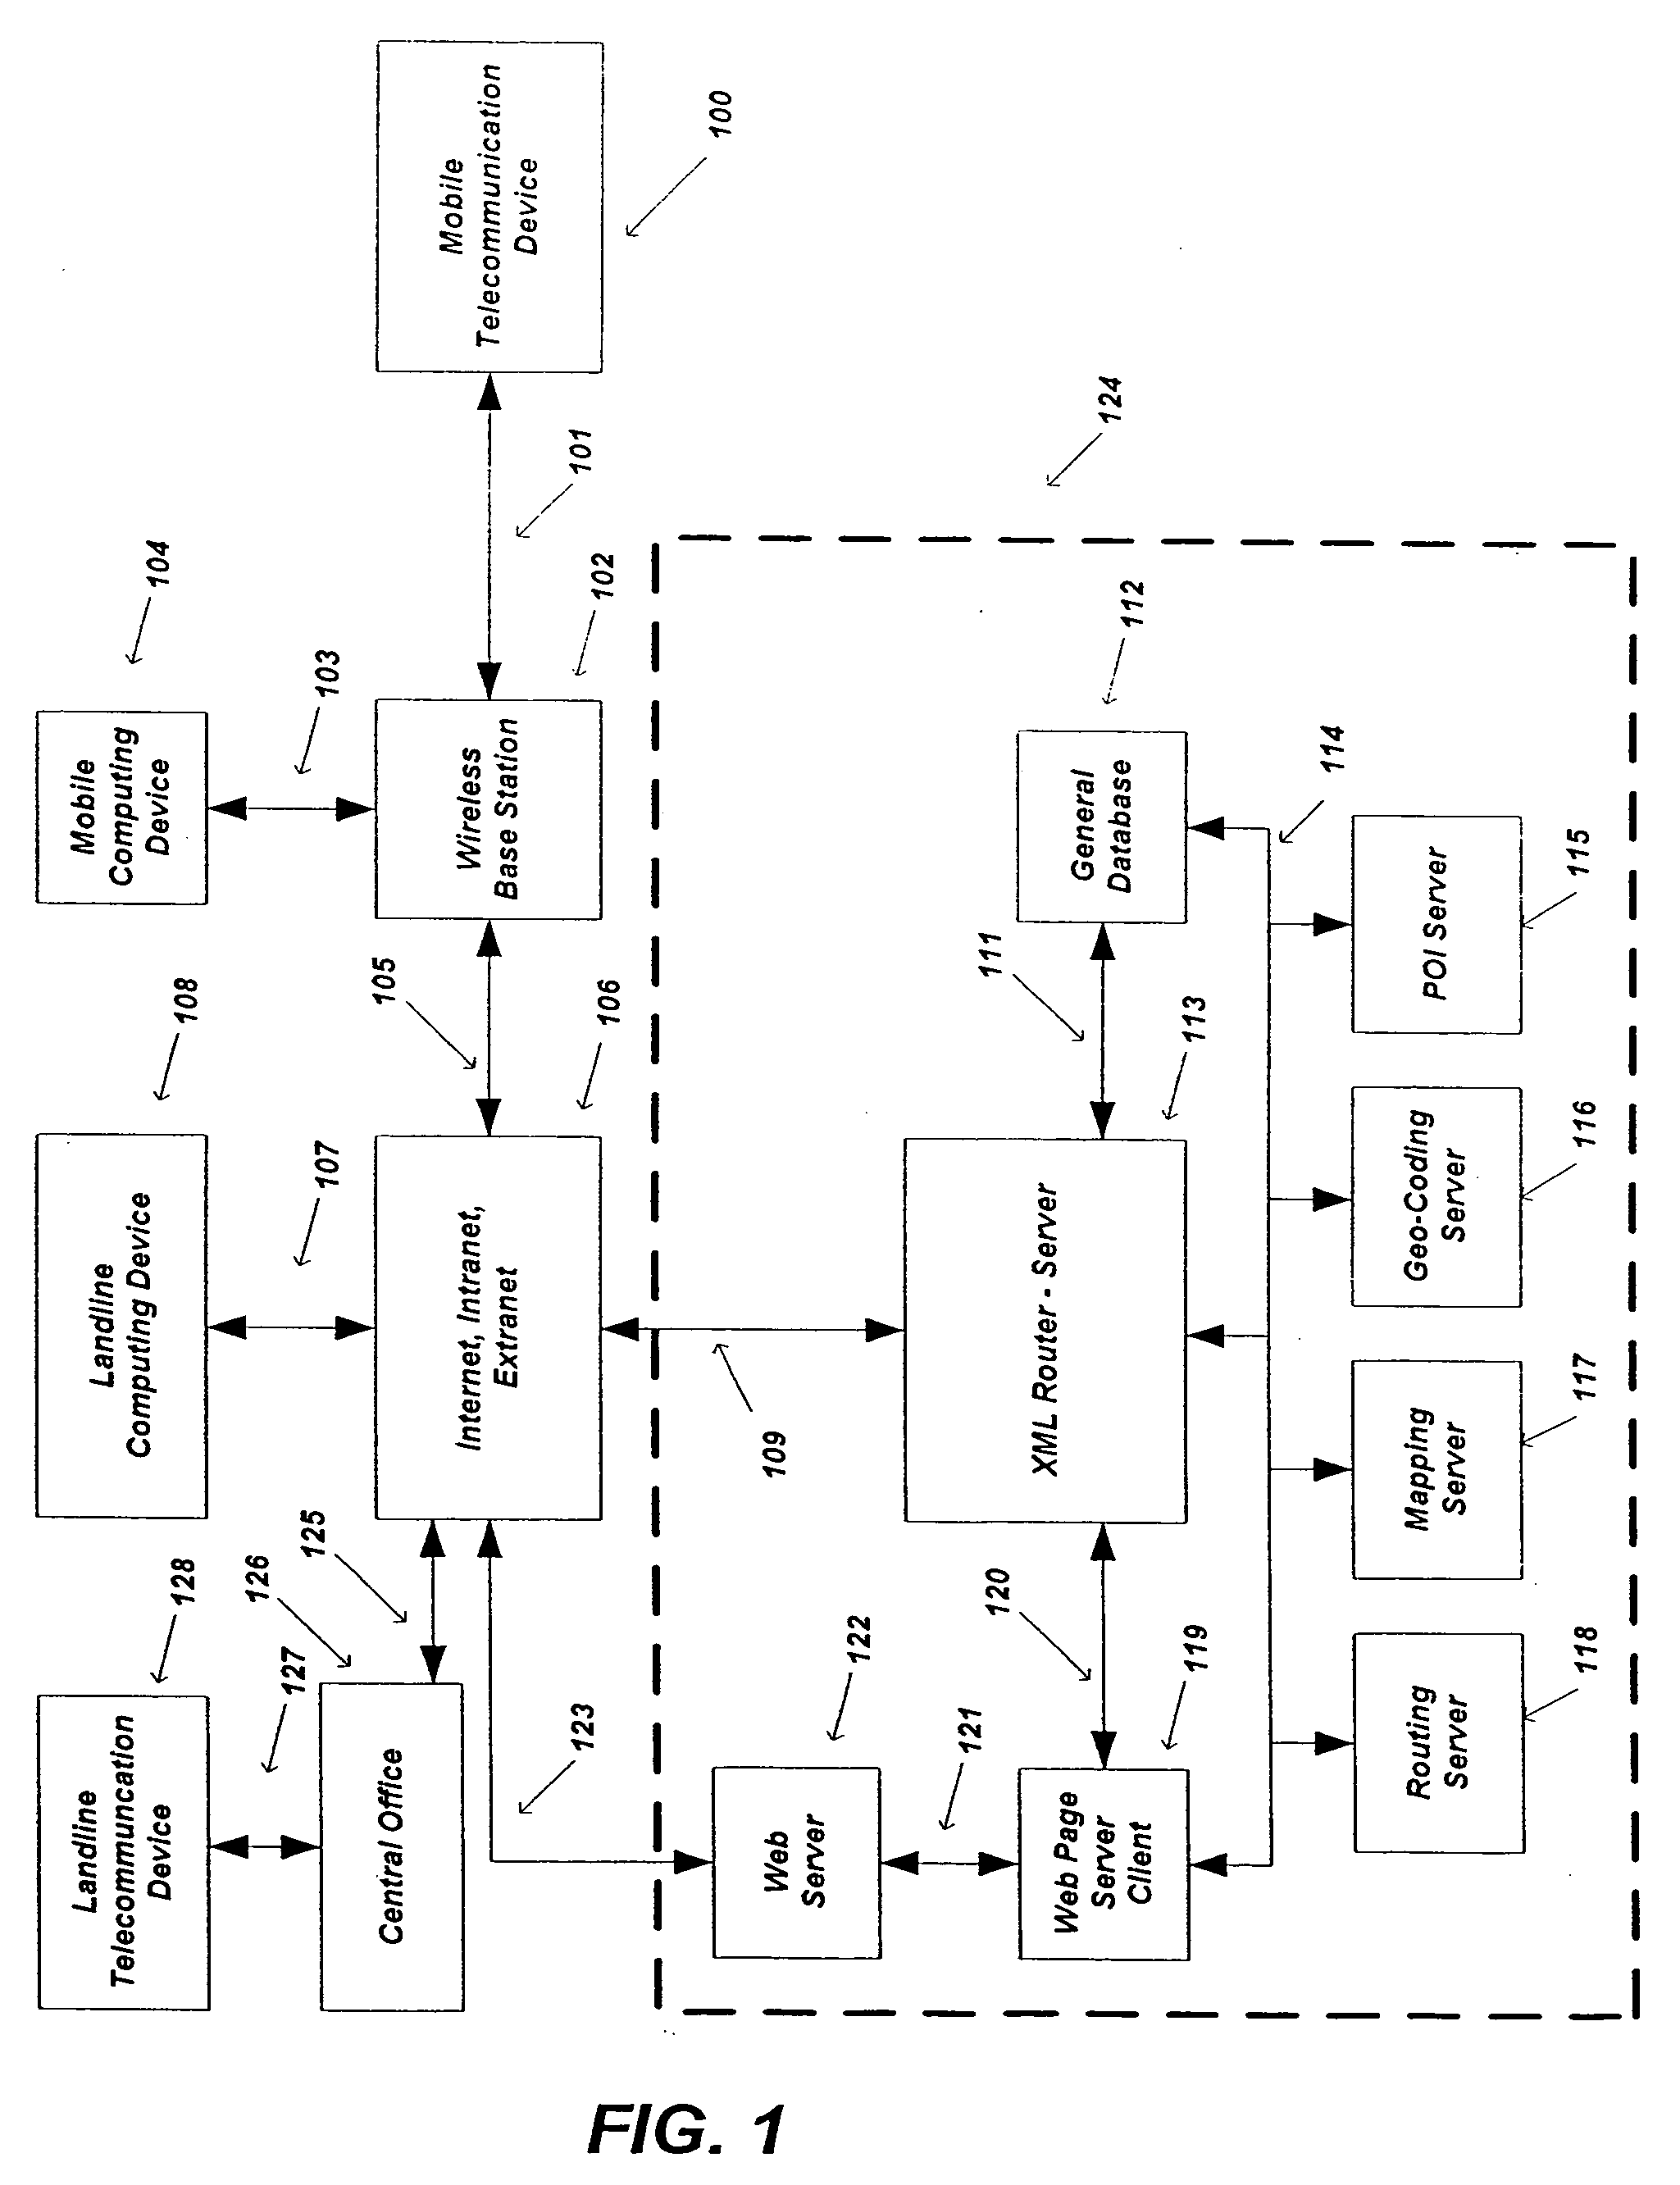 Method and system for enabling an off board navigation solution